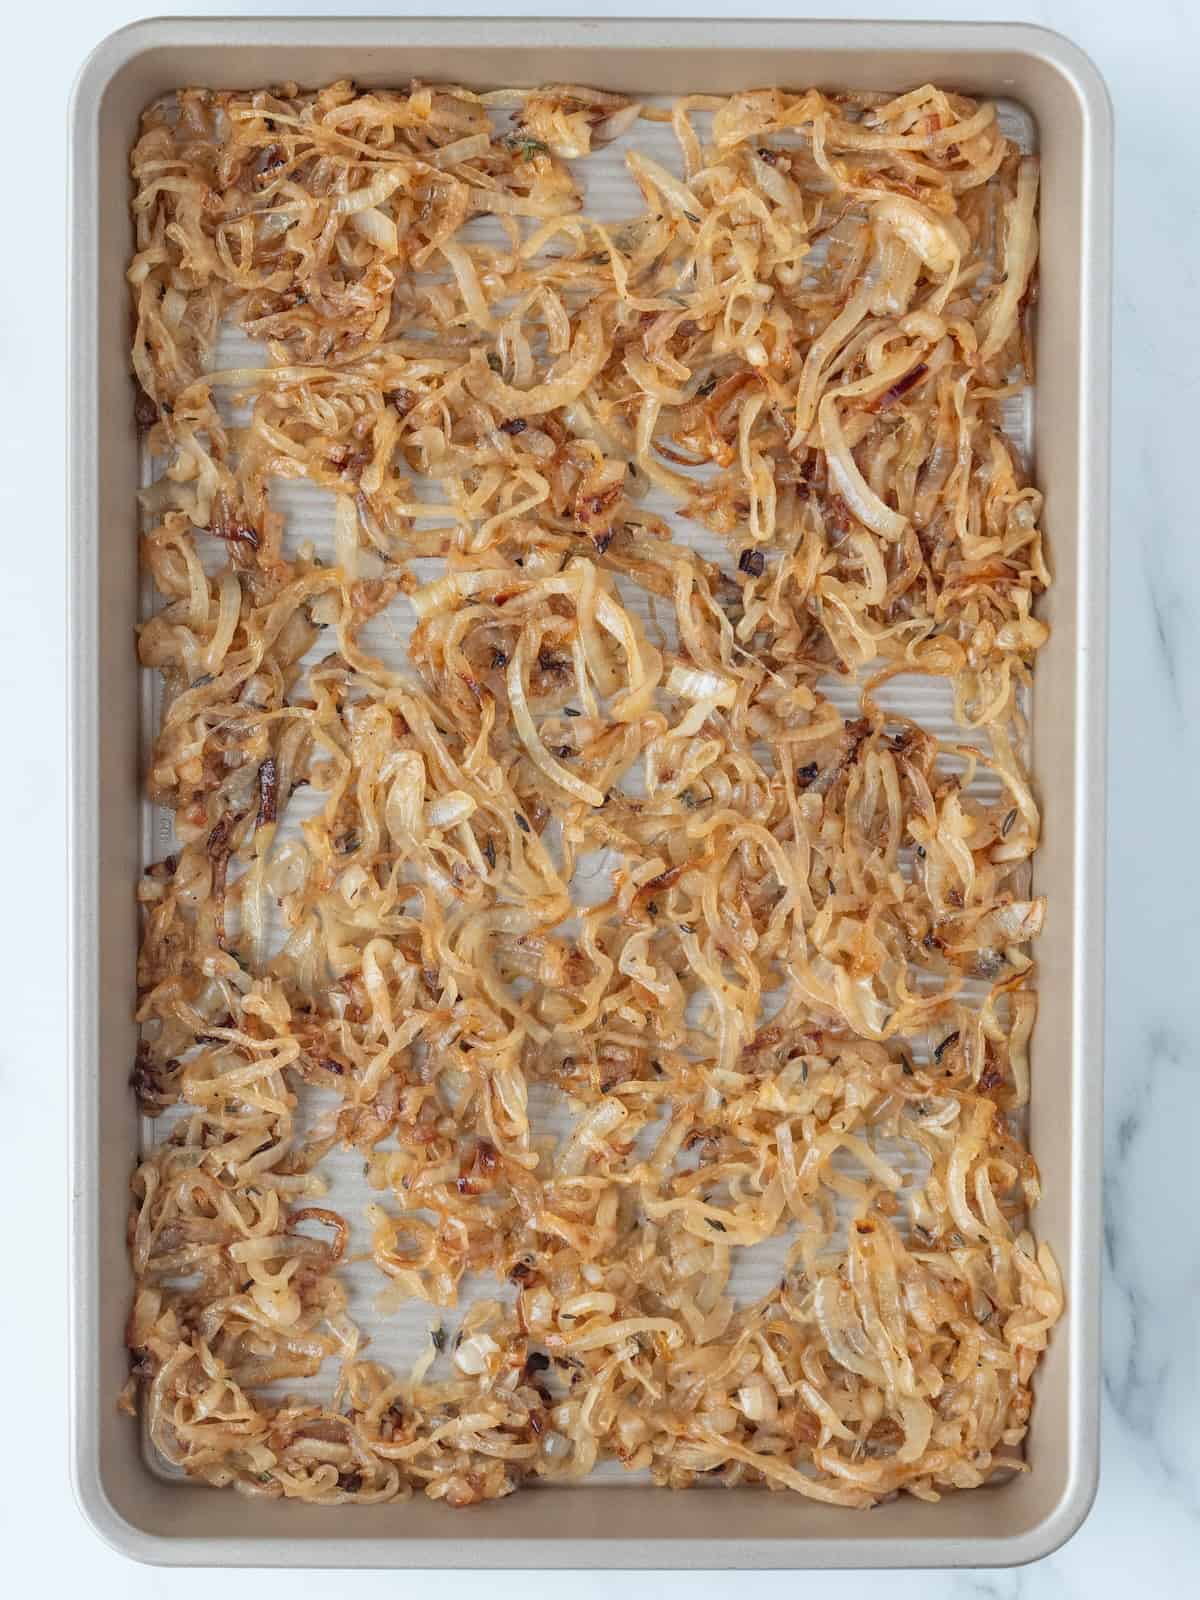 A baking sheet of roasted onions and garlic.